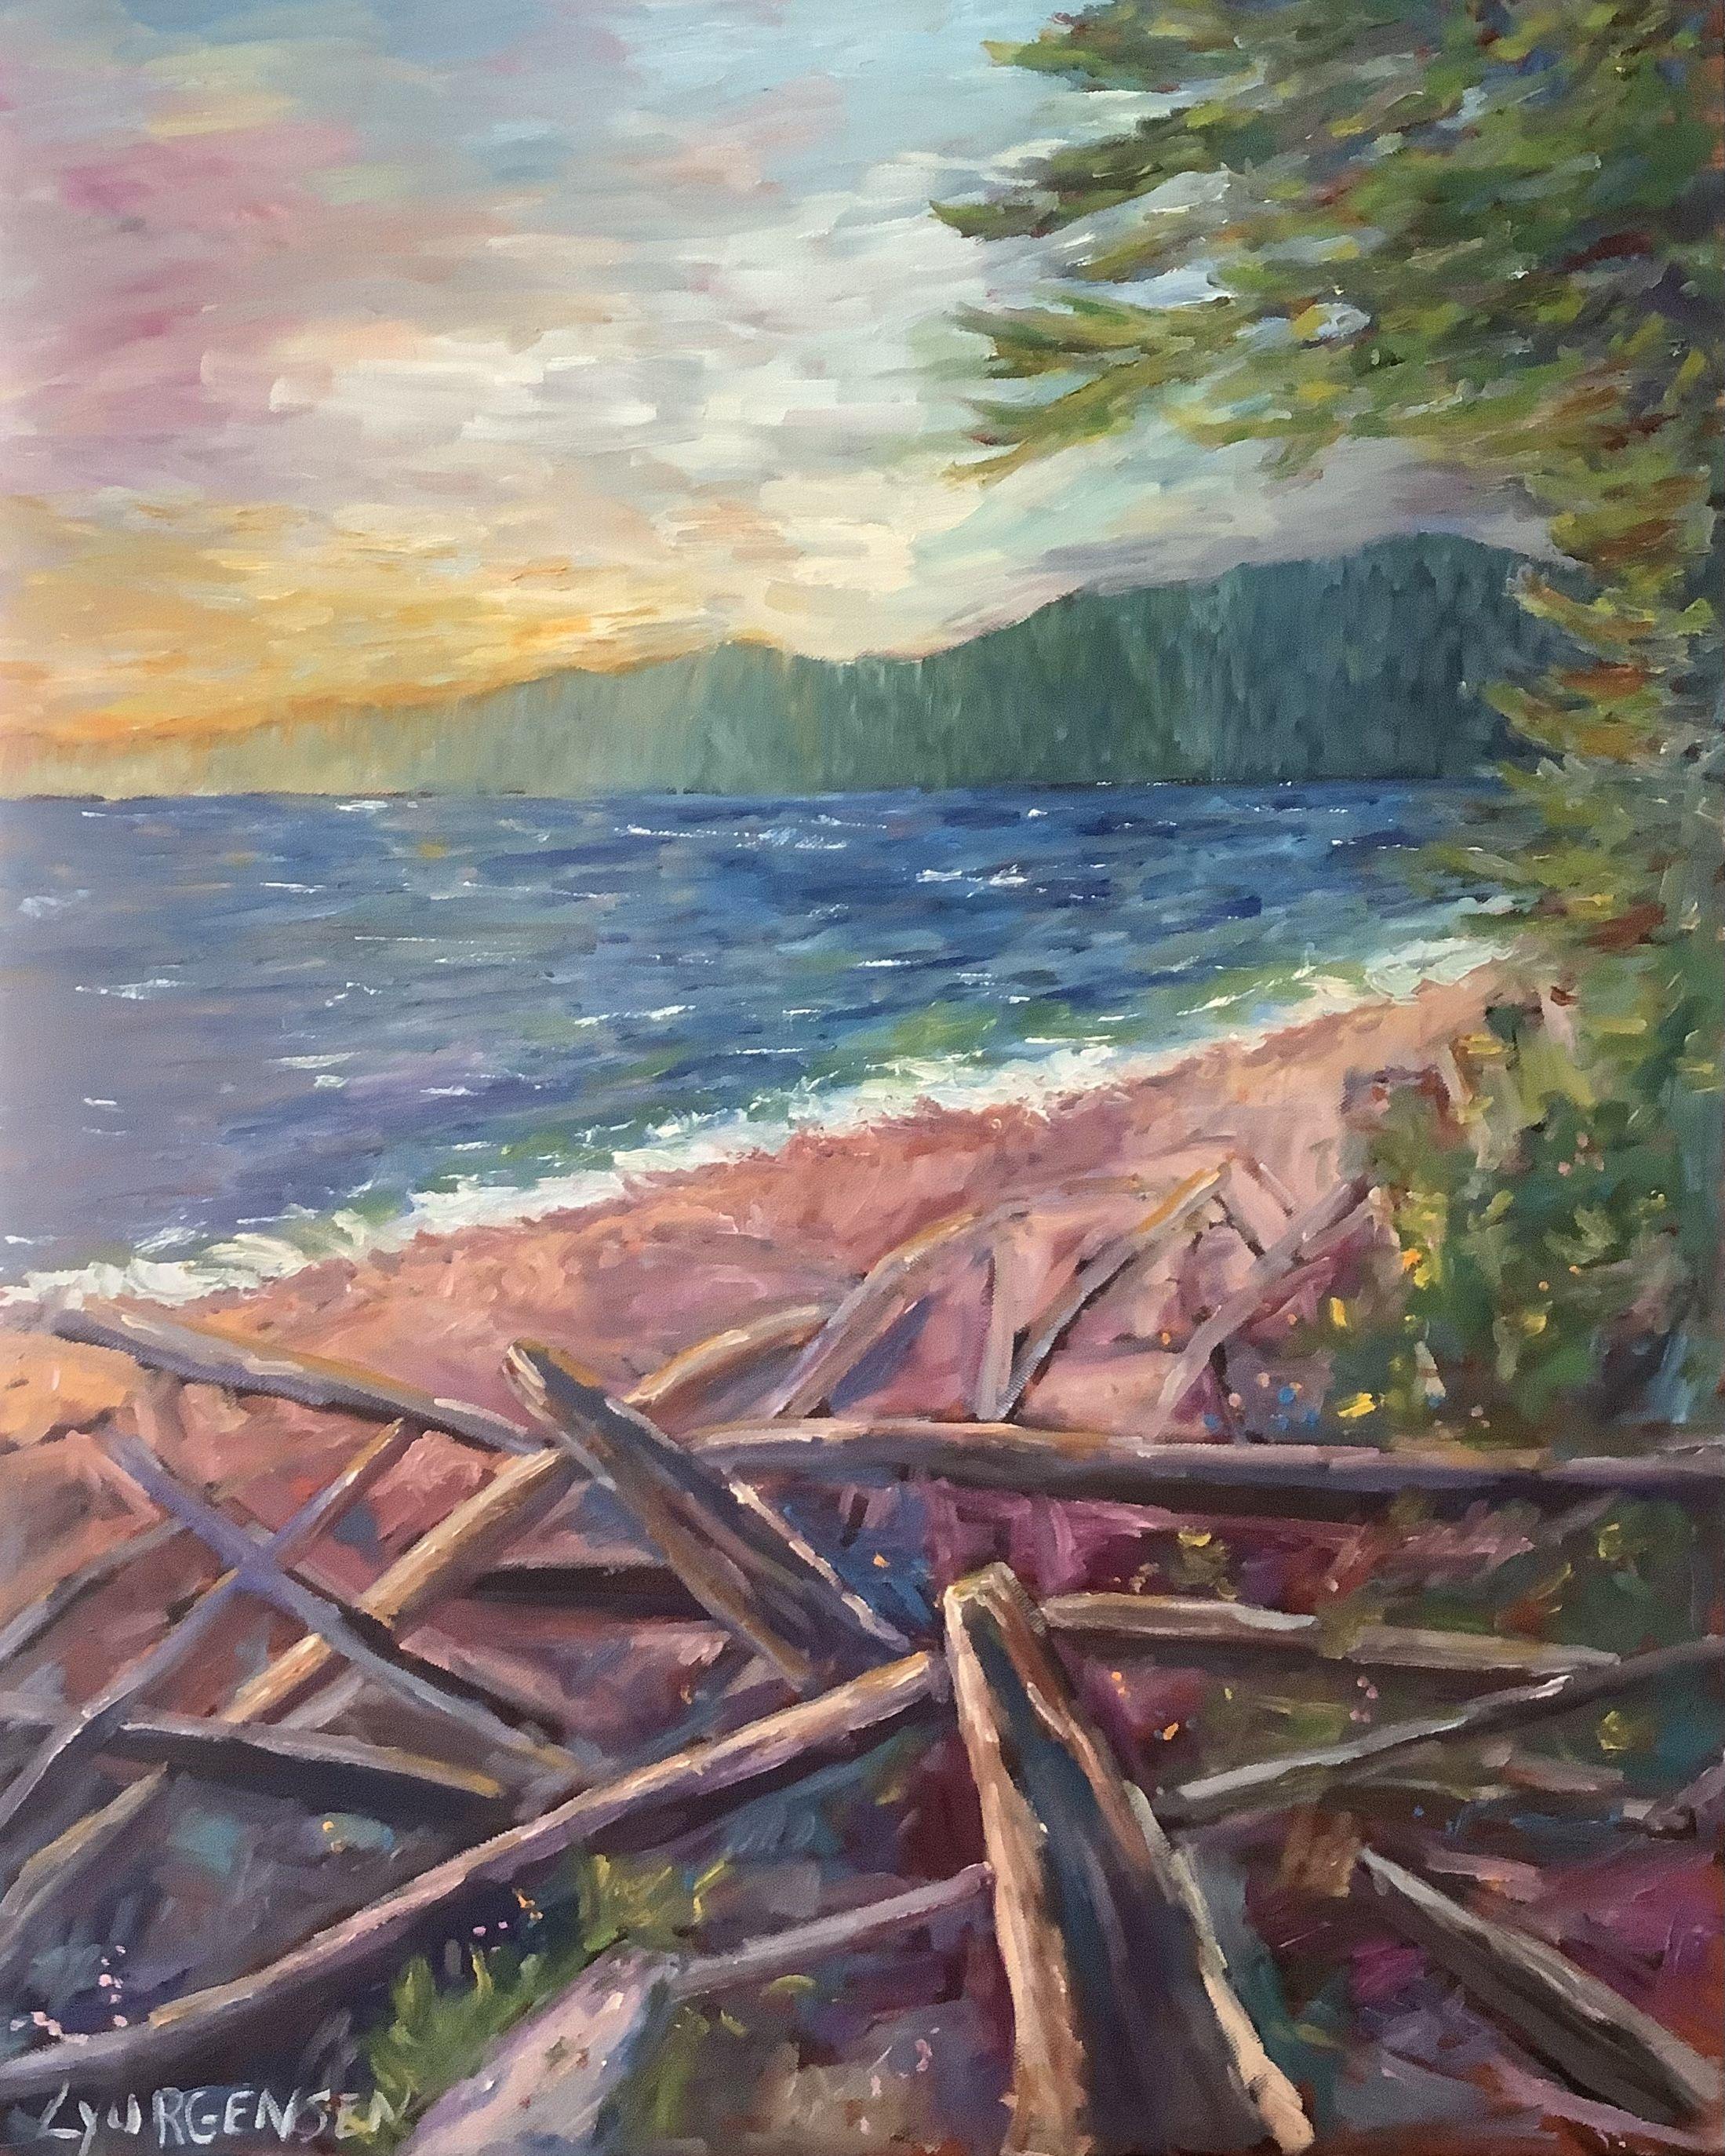 French beach can be found on the coast of Vancouver Island. The rugged and windswept beaches are a favourite area to paint. The sides of the thick canvas are painted to complete the look.  :: Painting :: Impressionist :: This piece comes with an